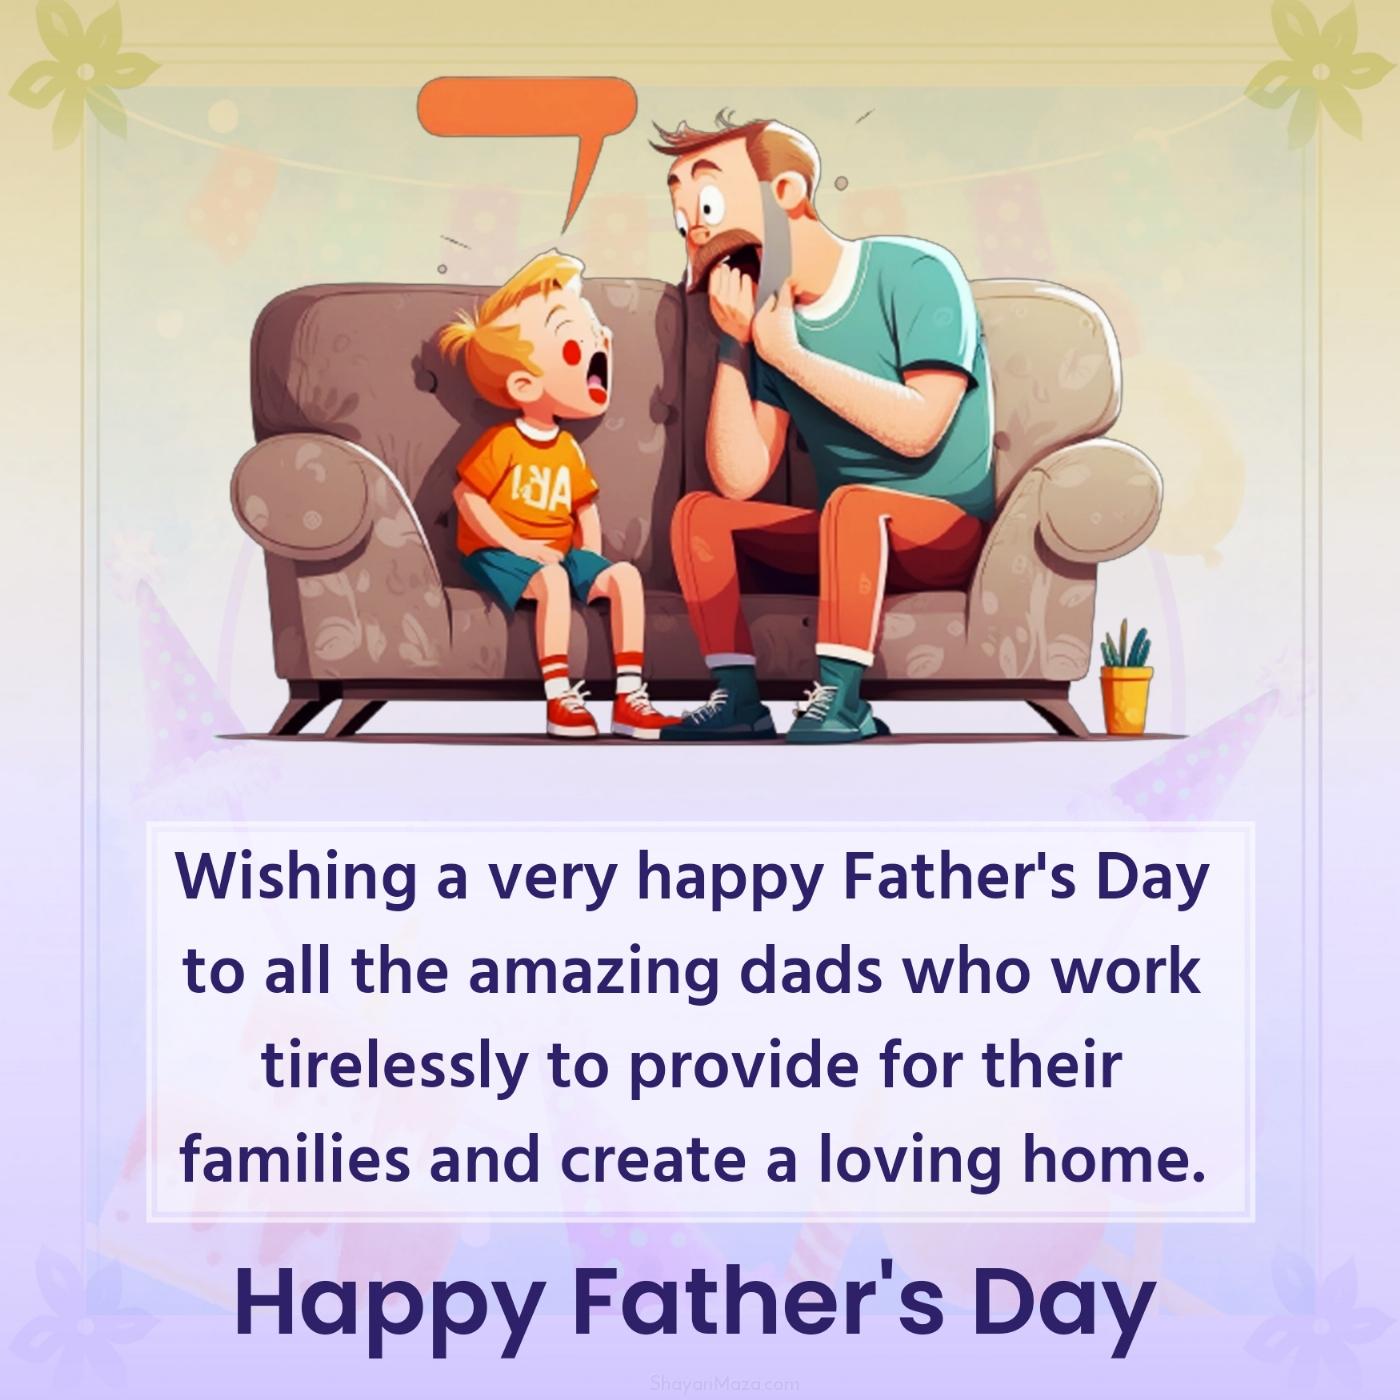 Wishing a very happy Father's Day to all the amazing dads